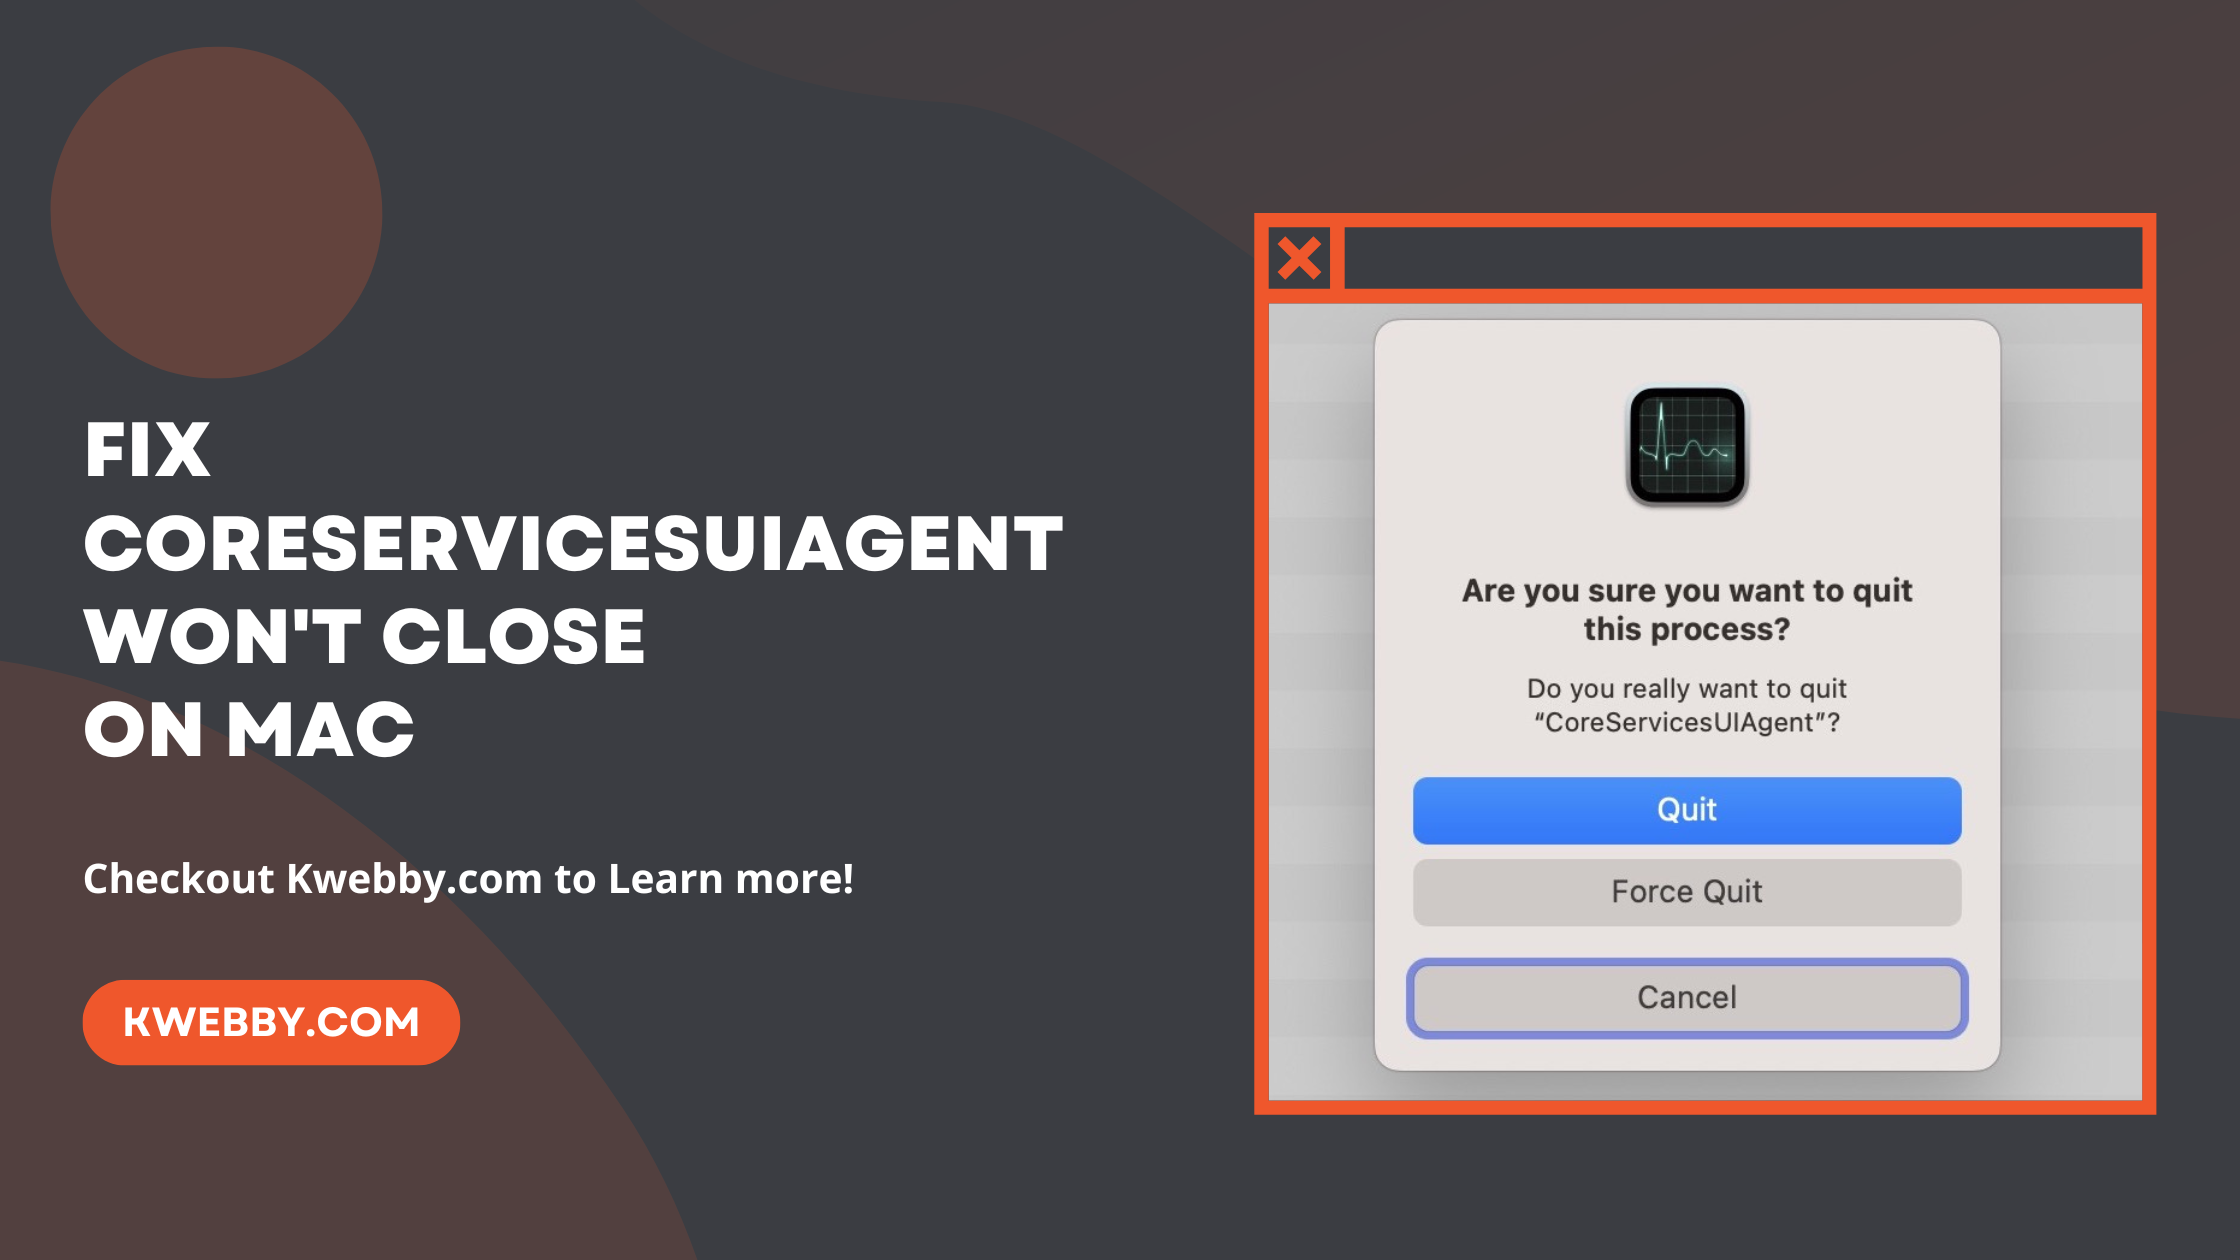 How to Fix CoreServicesUIAgent Won’t Close on Mac (8 Methods)